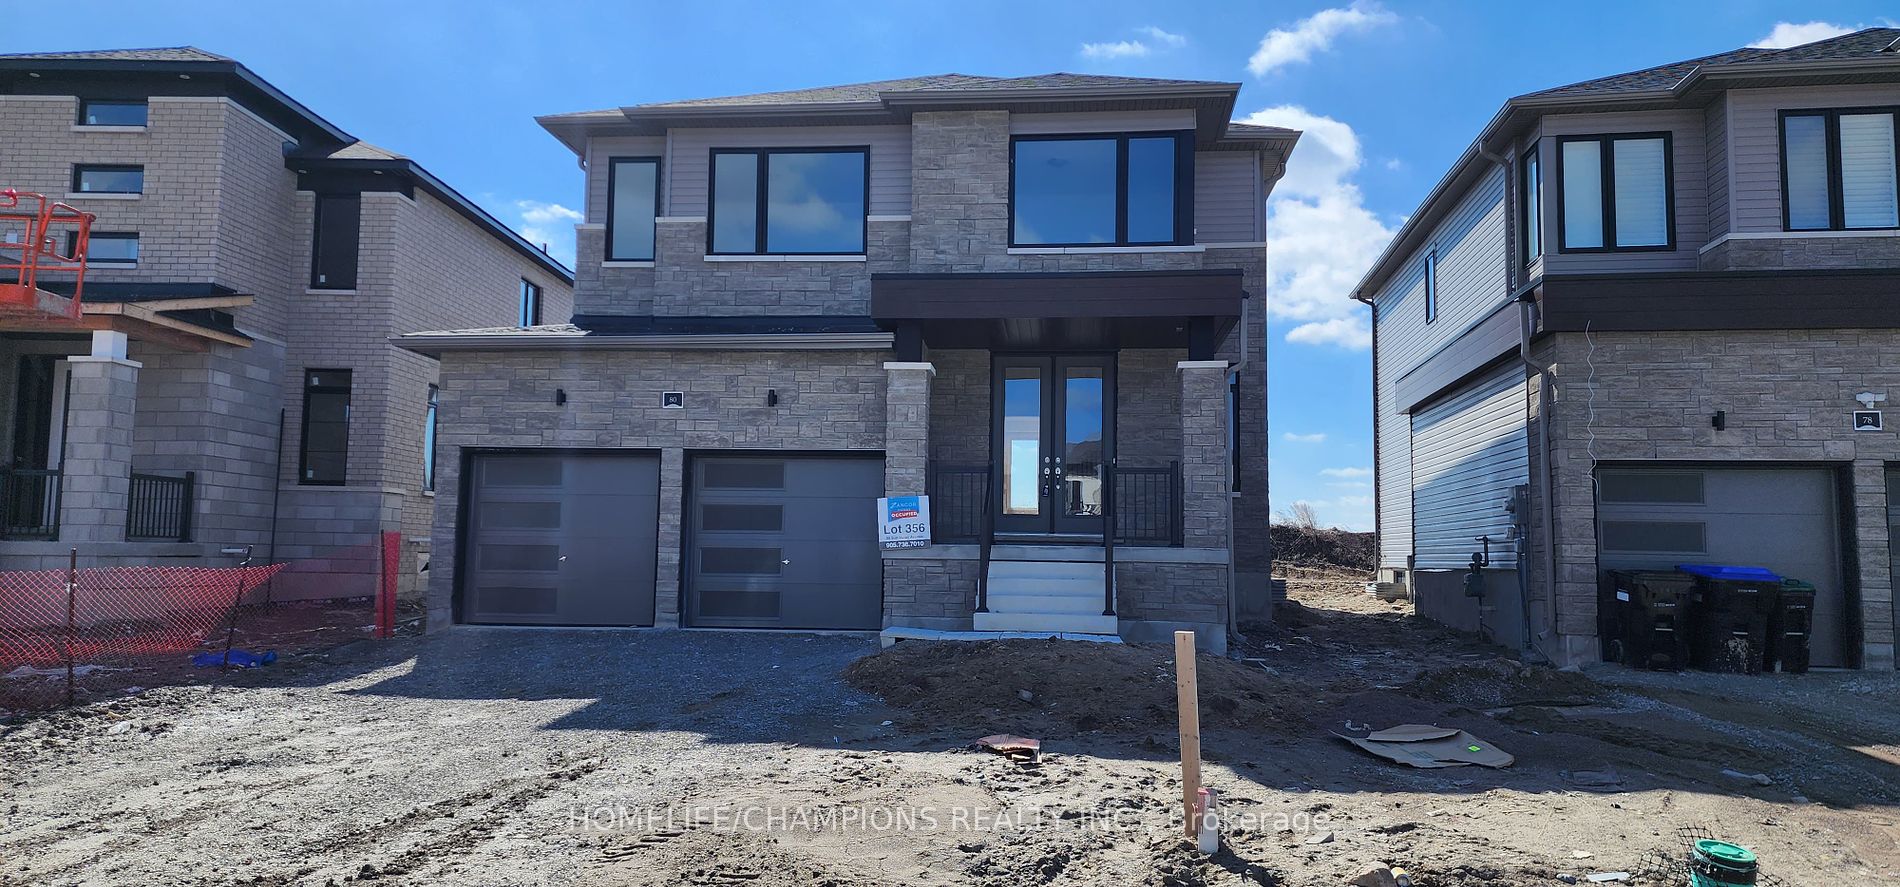 Detached house for sale at 80 Sun Valley Ave Wasaga Beach Ontario